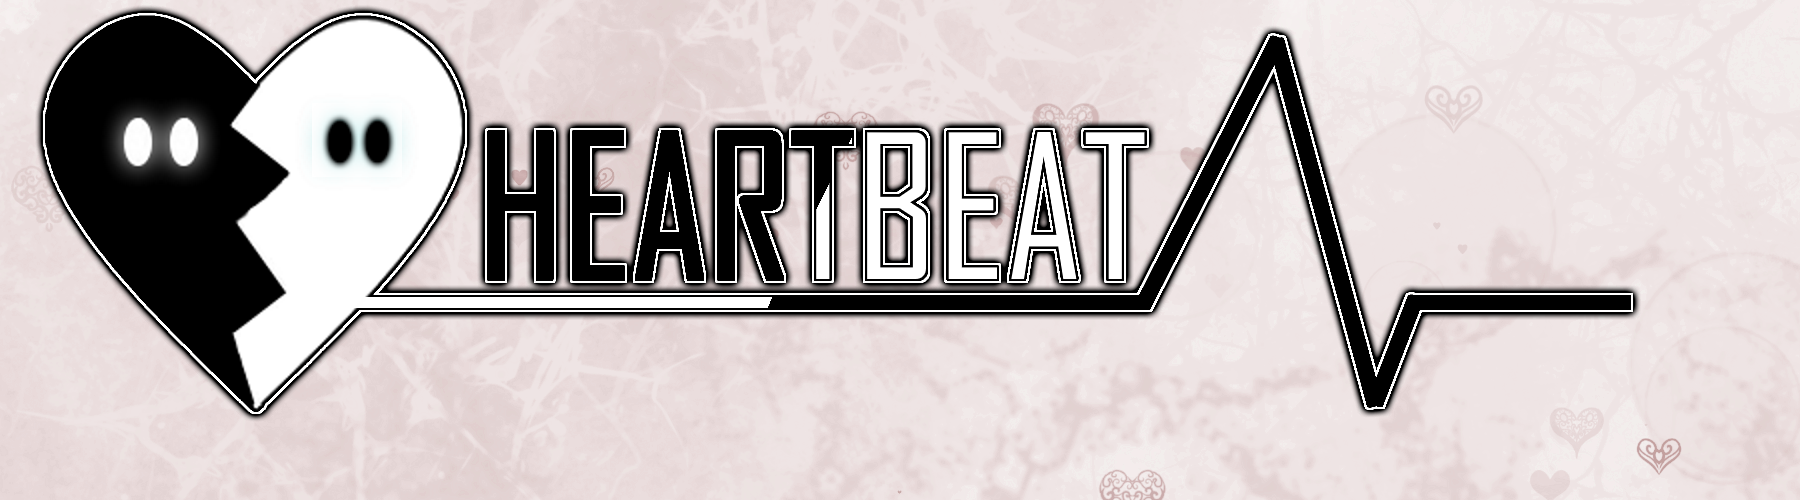 Heartbeat - Version 2.0 out now!